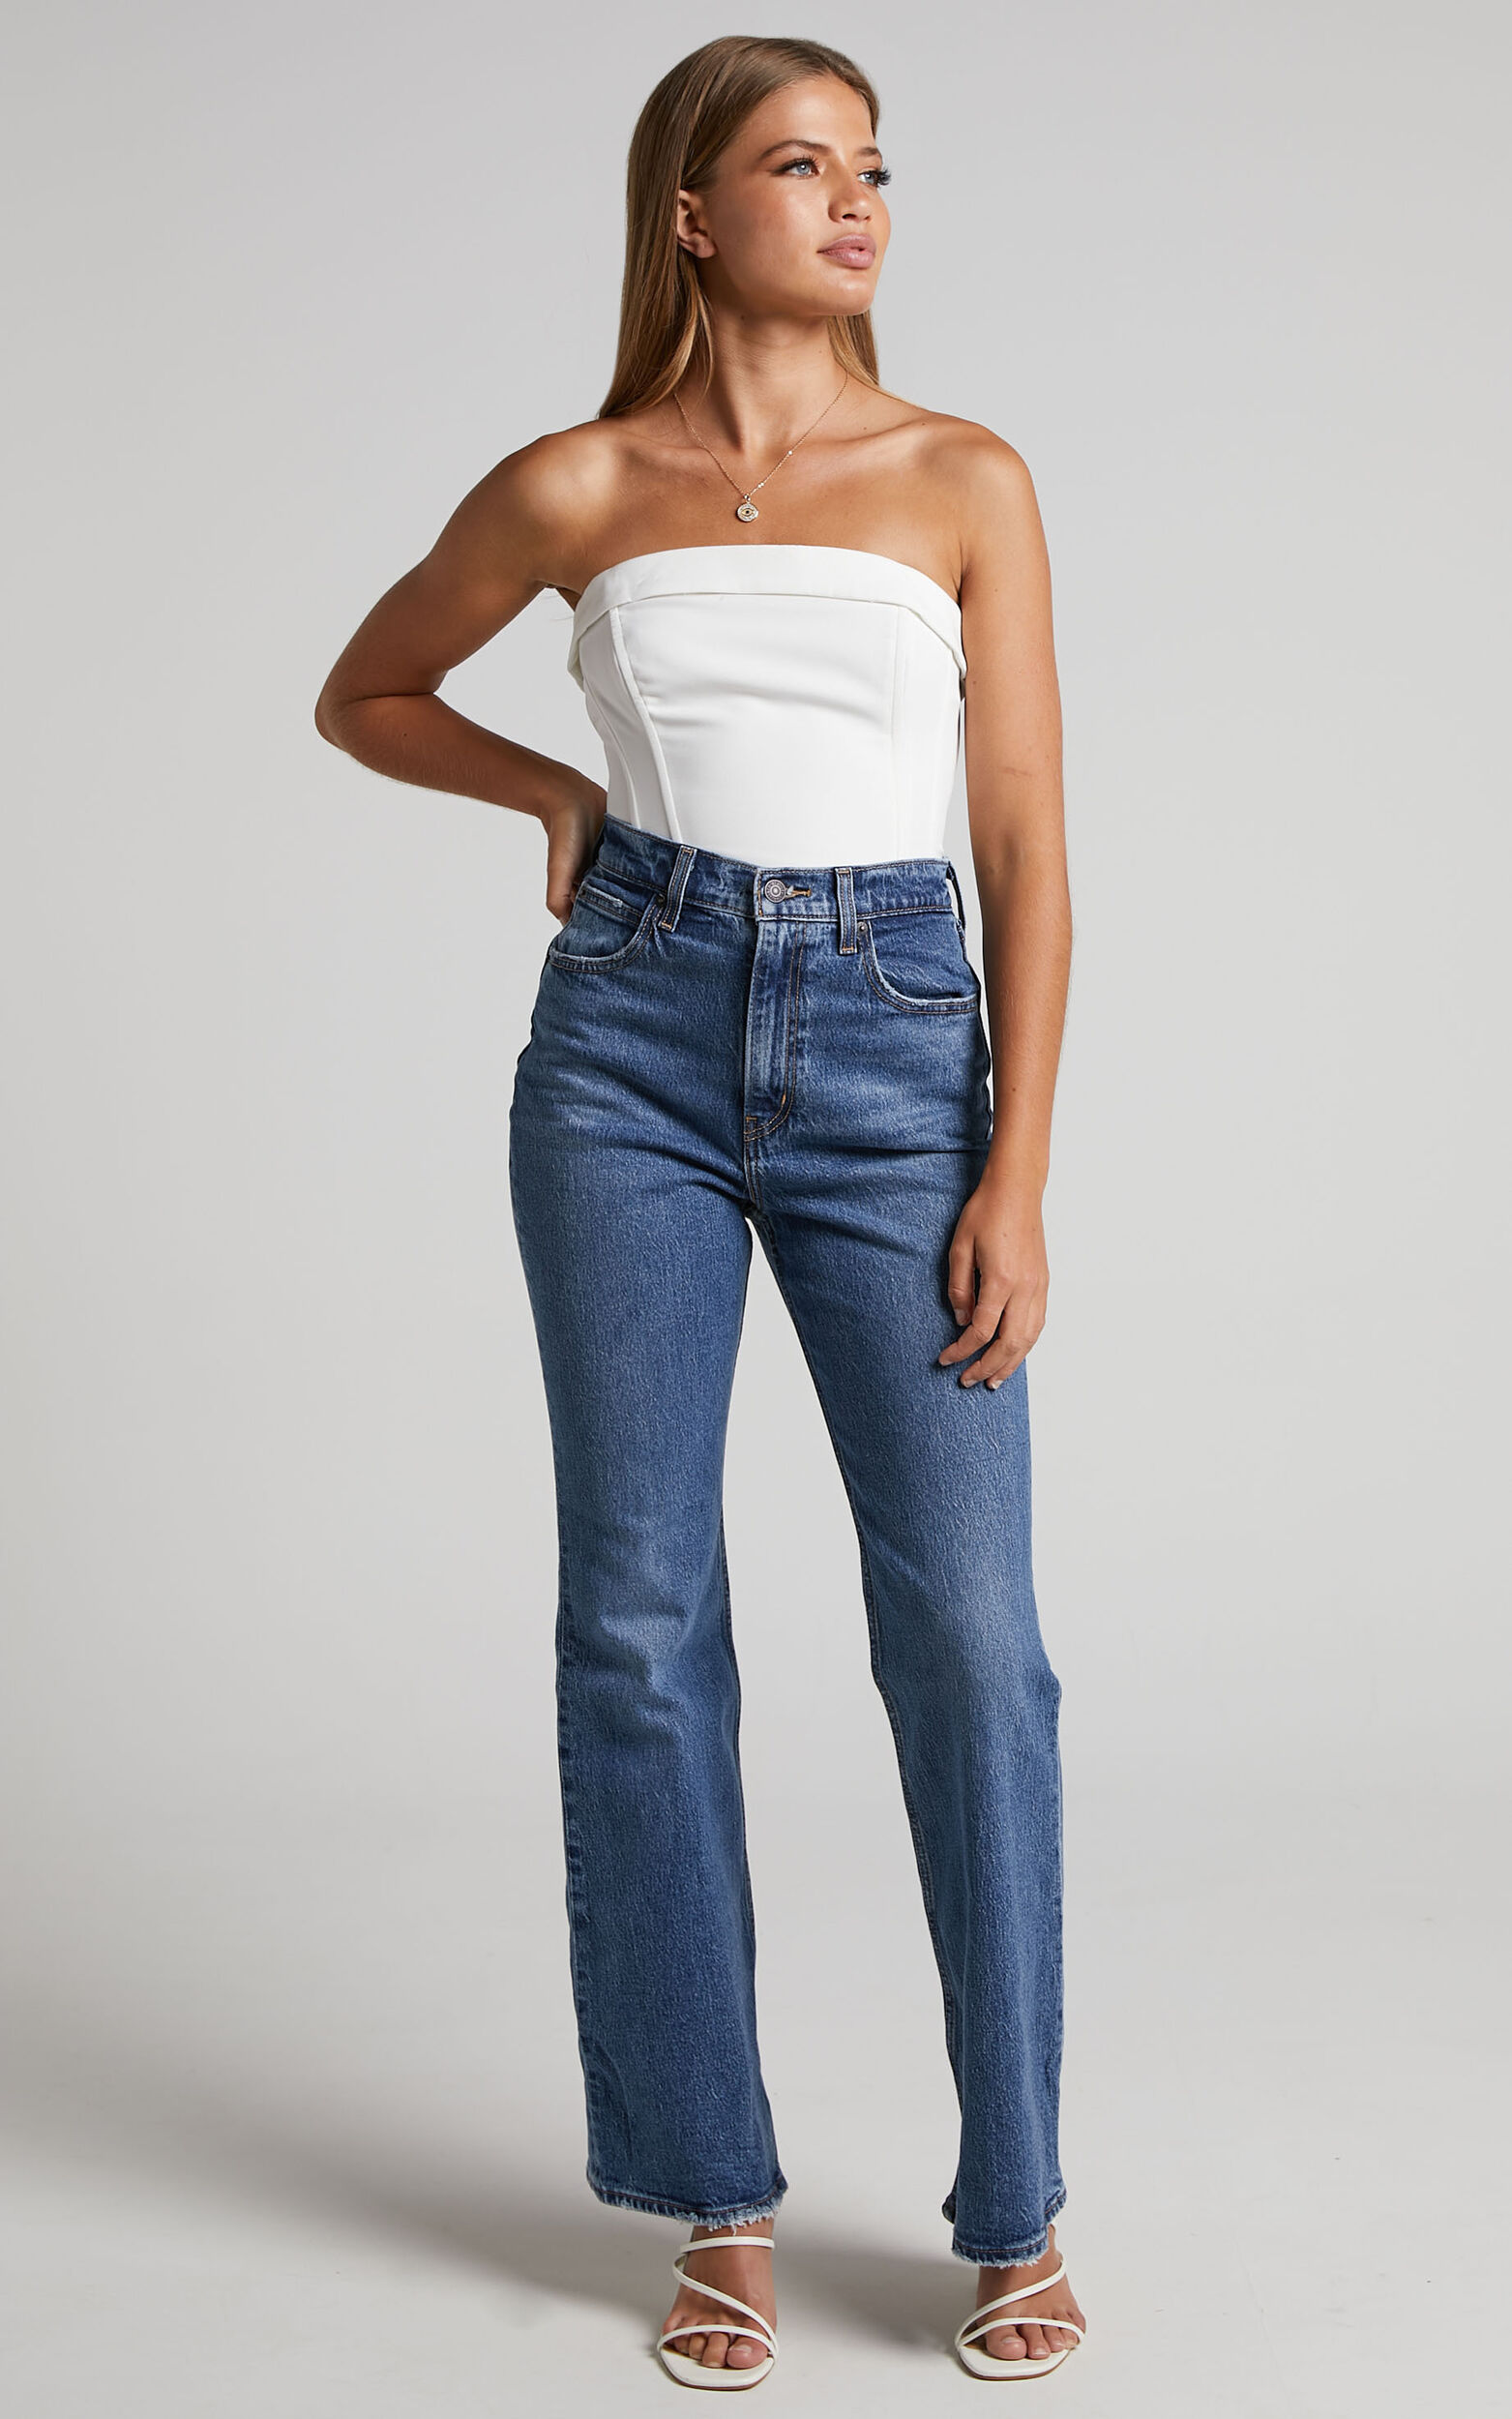 Levi's - 70s High Flare Jeans in SONOMA STEP - 06, BLU1